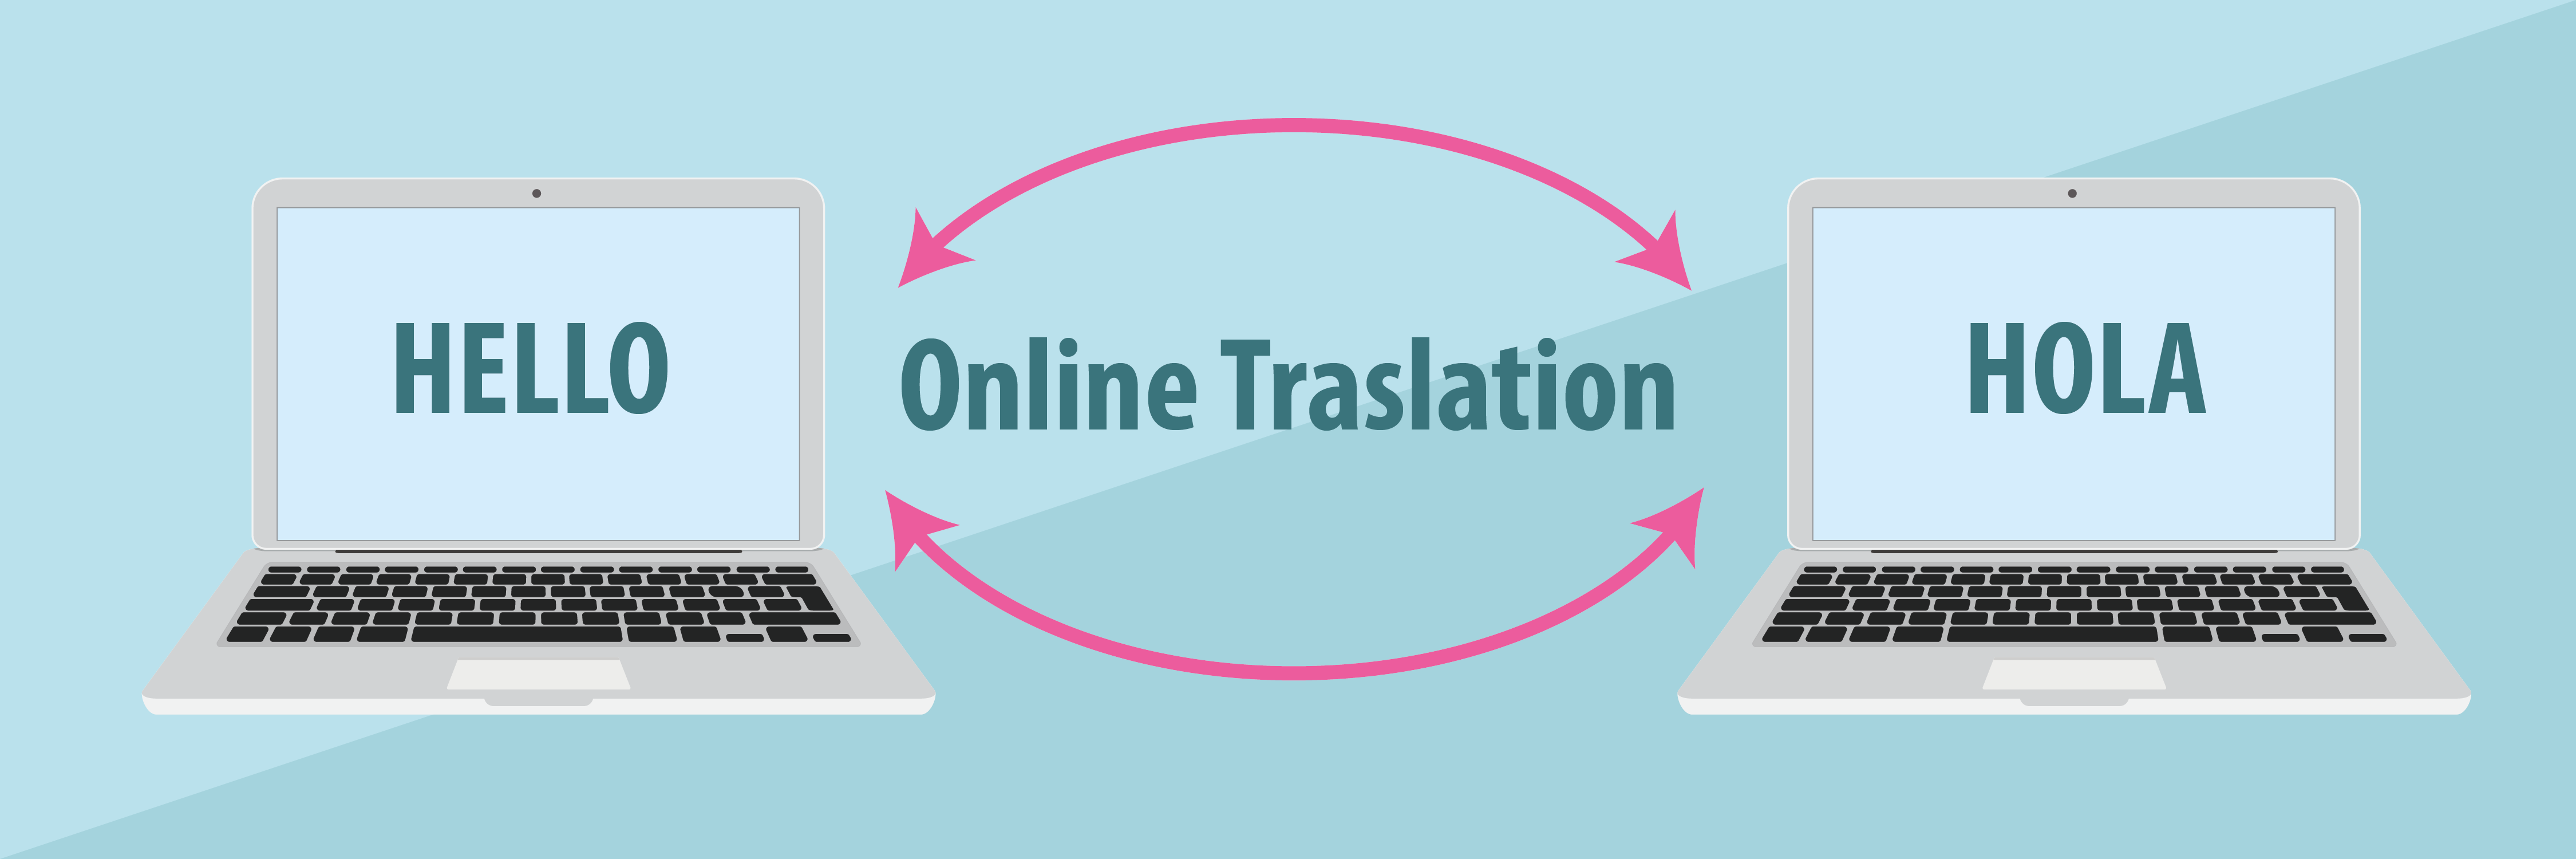 online-translating-services-two-computers-translating-hello-to-hola